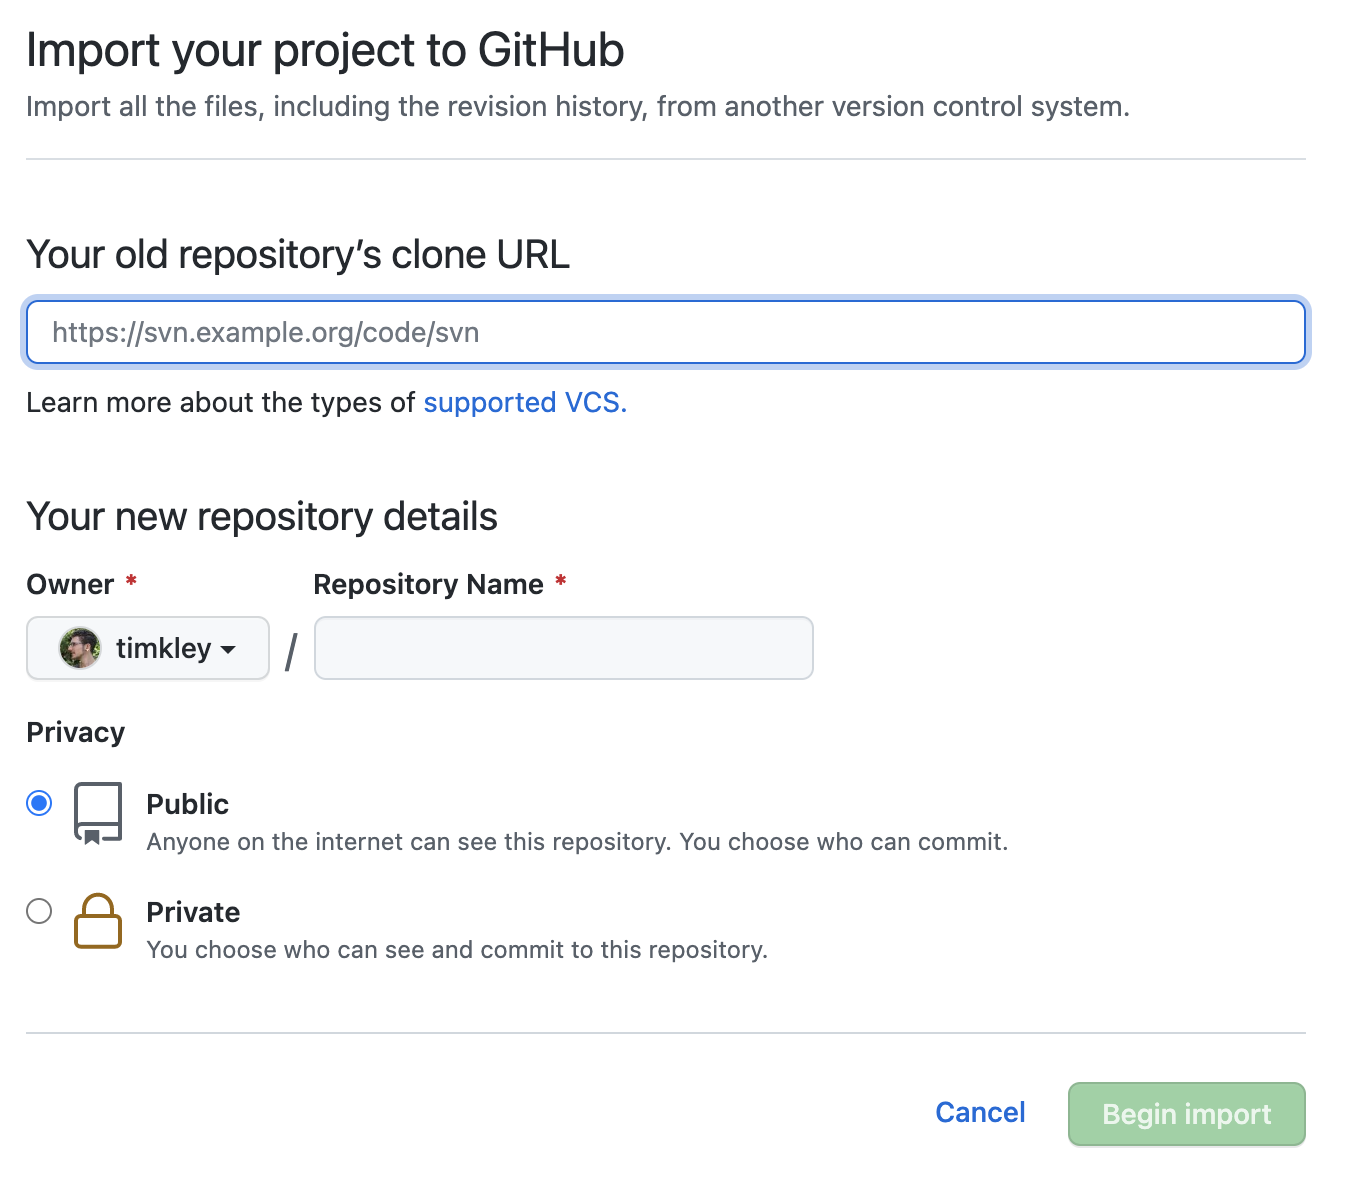 The GitHub import dialogue